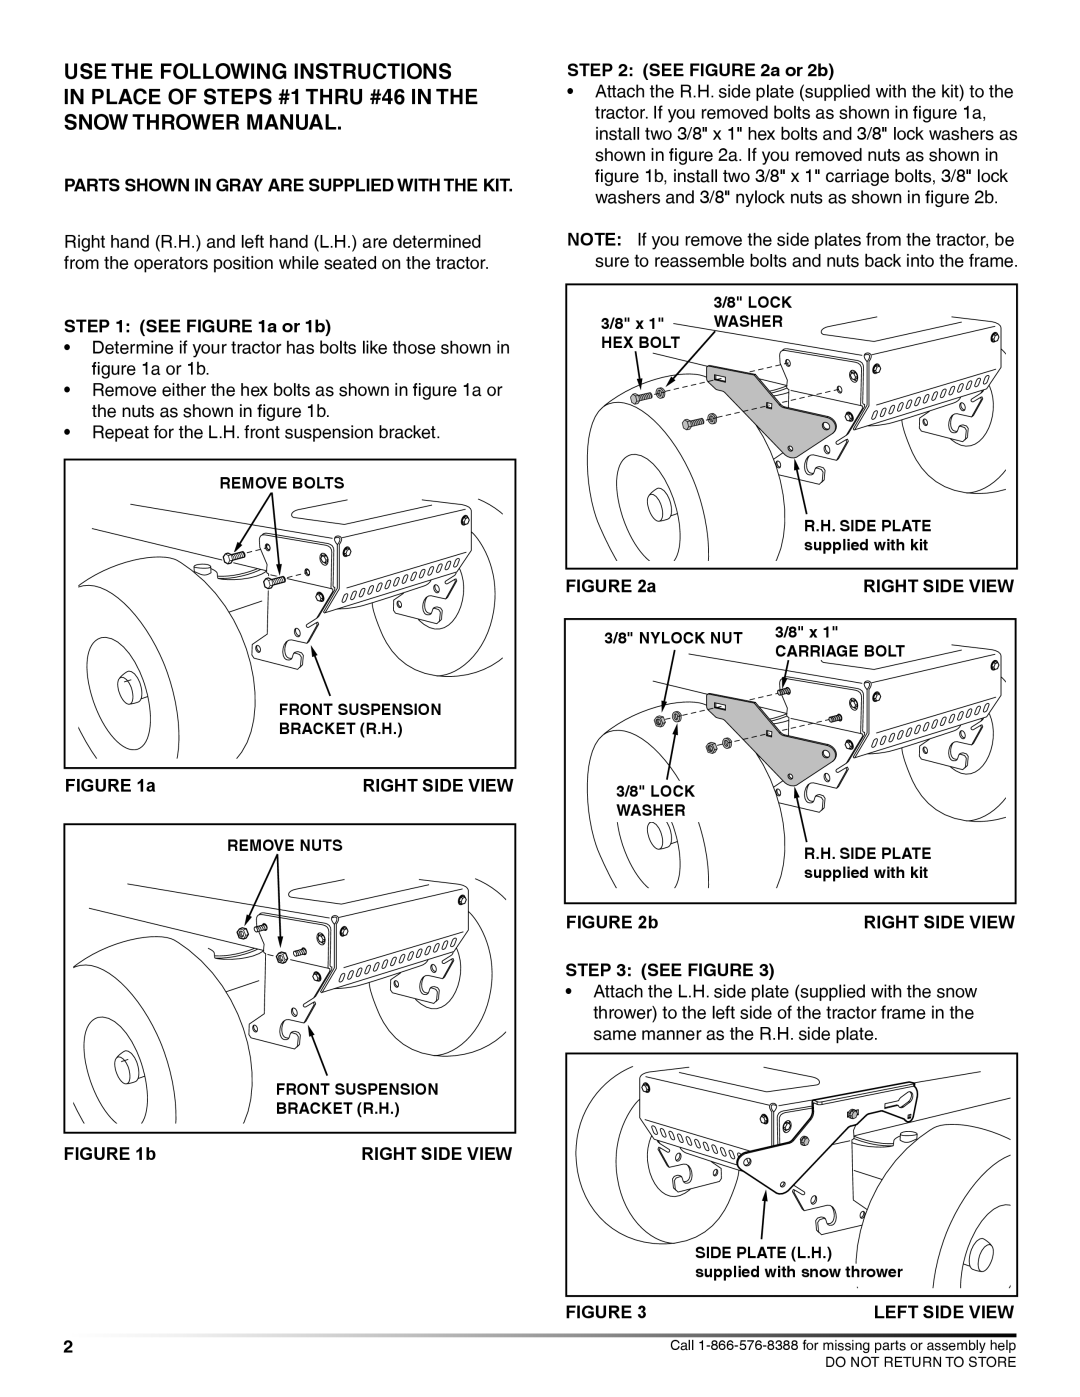 Craftsman 71-24831 instruction manual Parts shown in gray are supplied with the kit, SEE a or 1b, SEE a or 2b, See Figure 